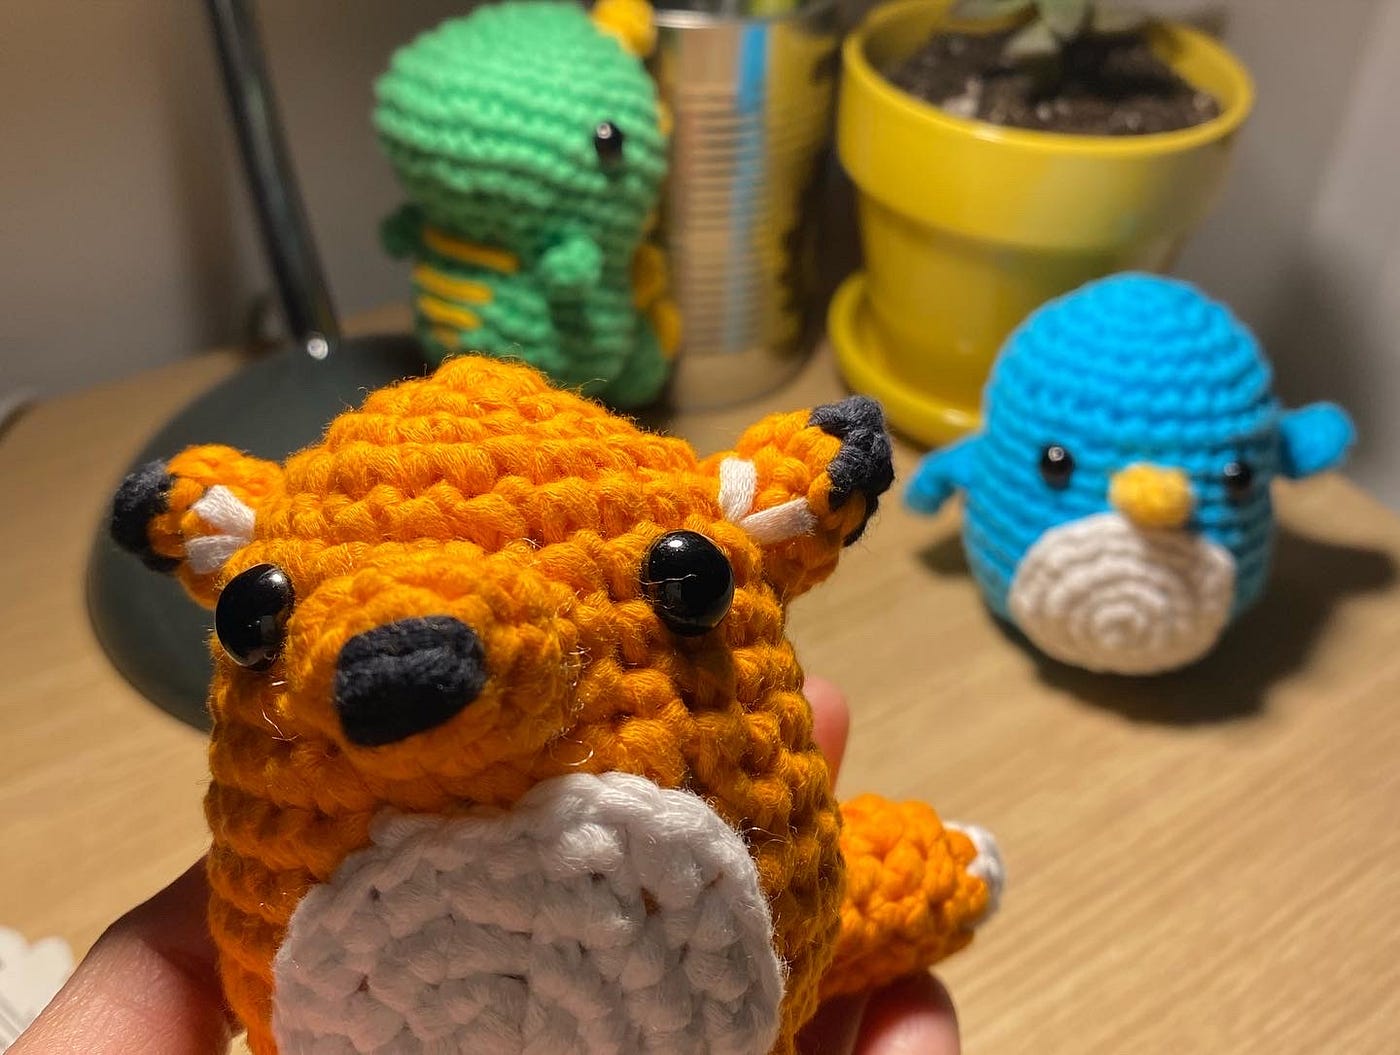 10 Reasons Why The Woobles Crochet Kits Are So Awesome - Stardust